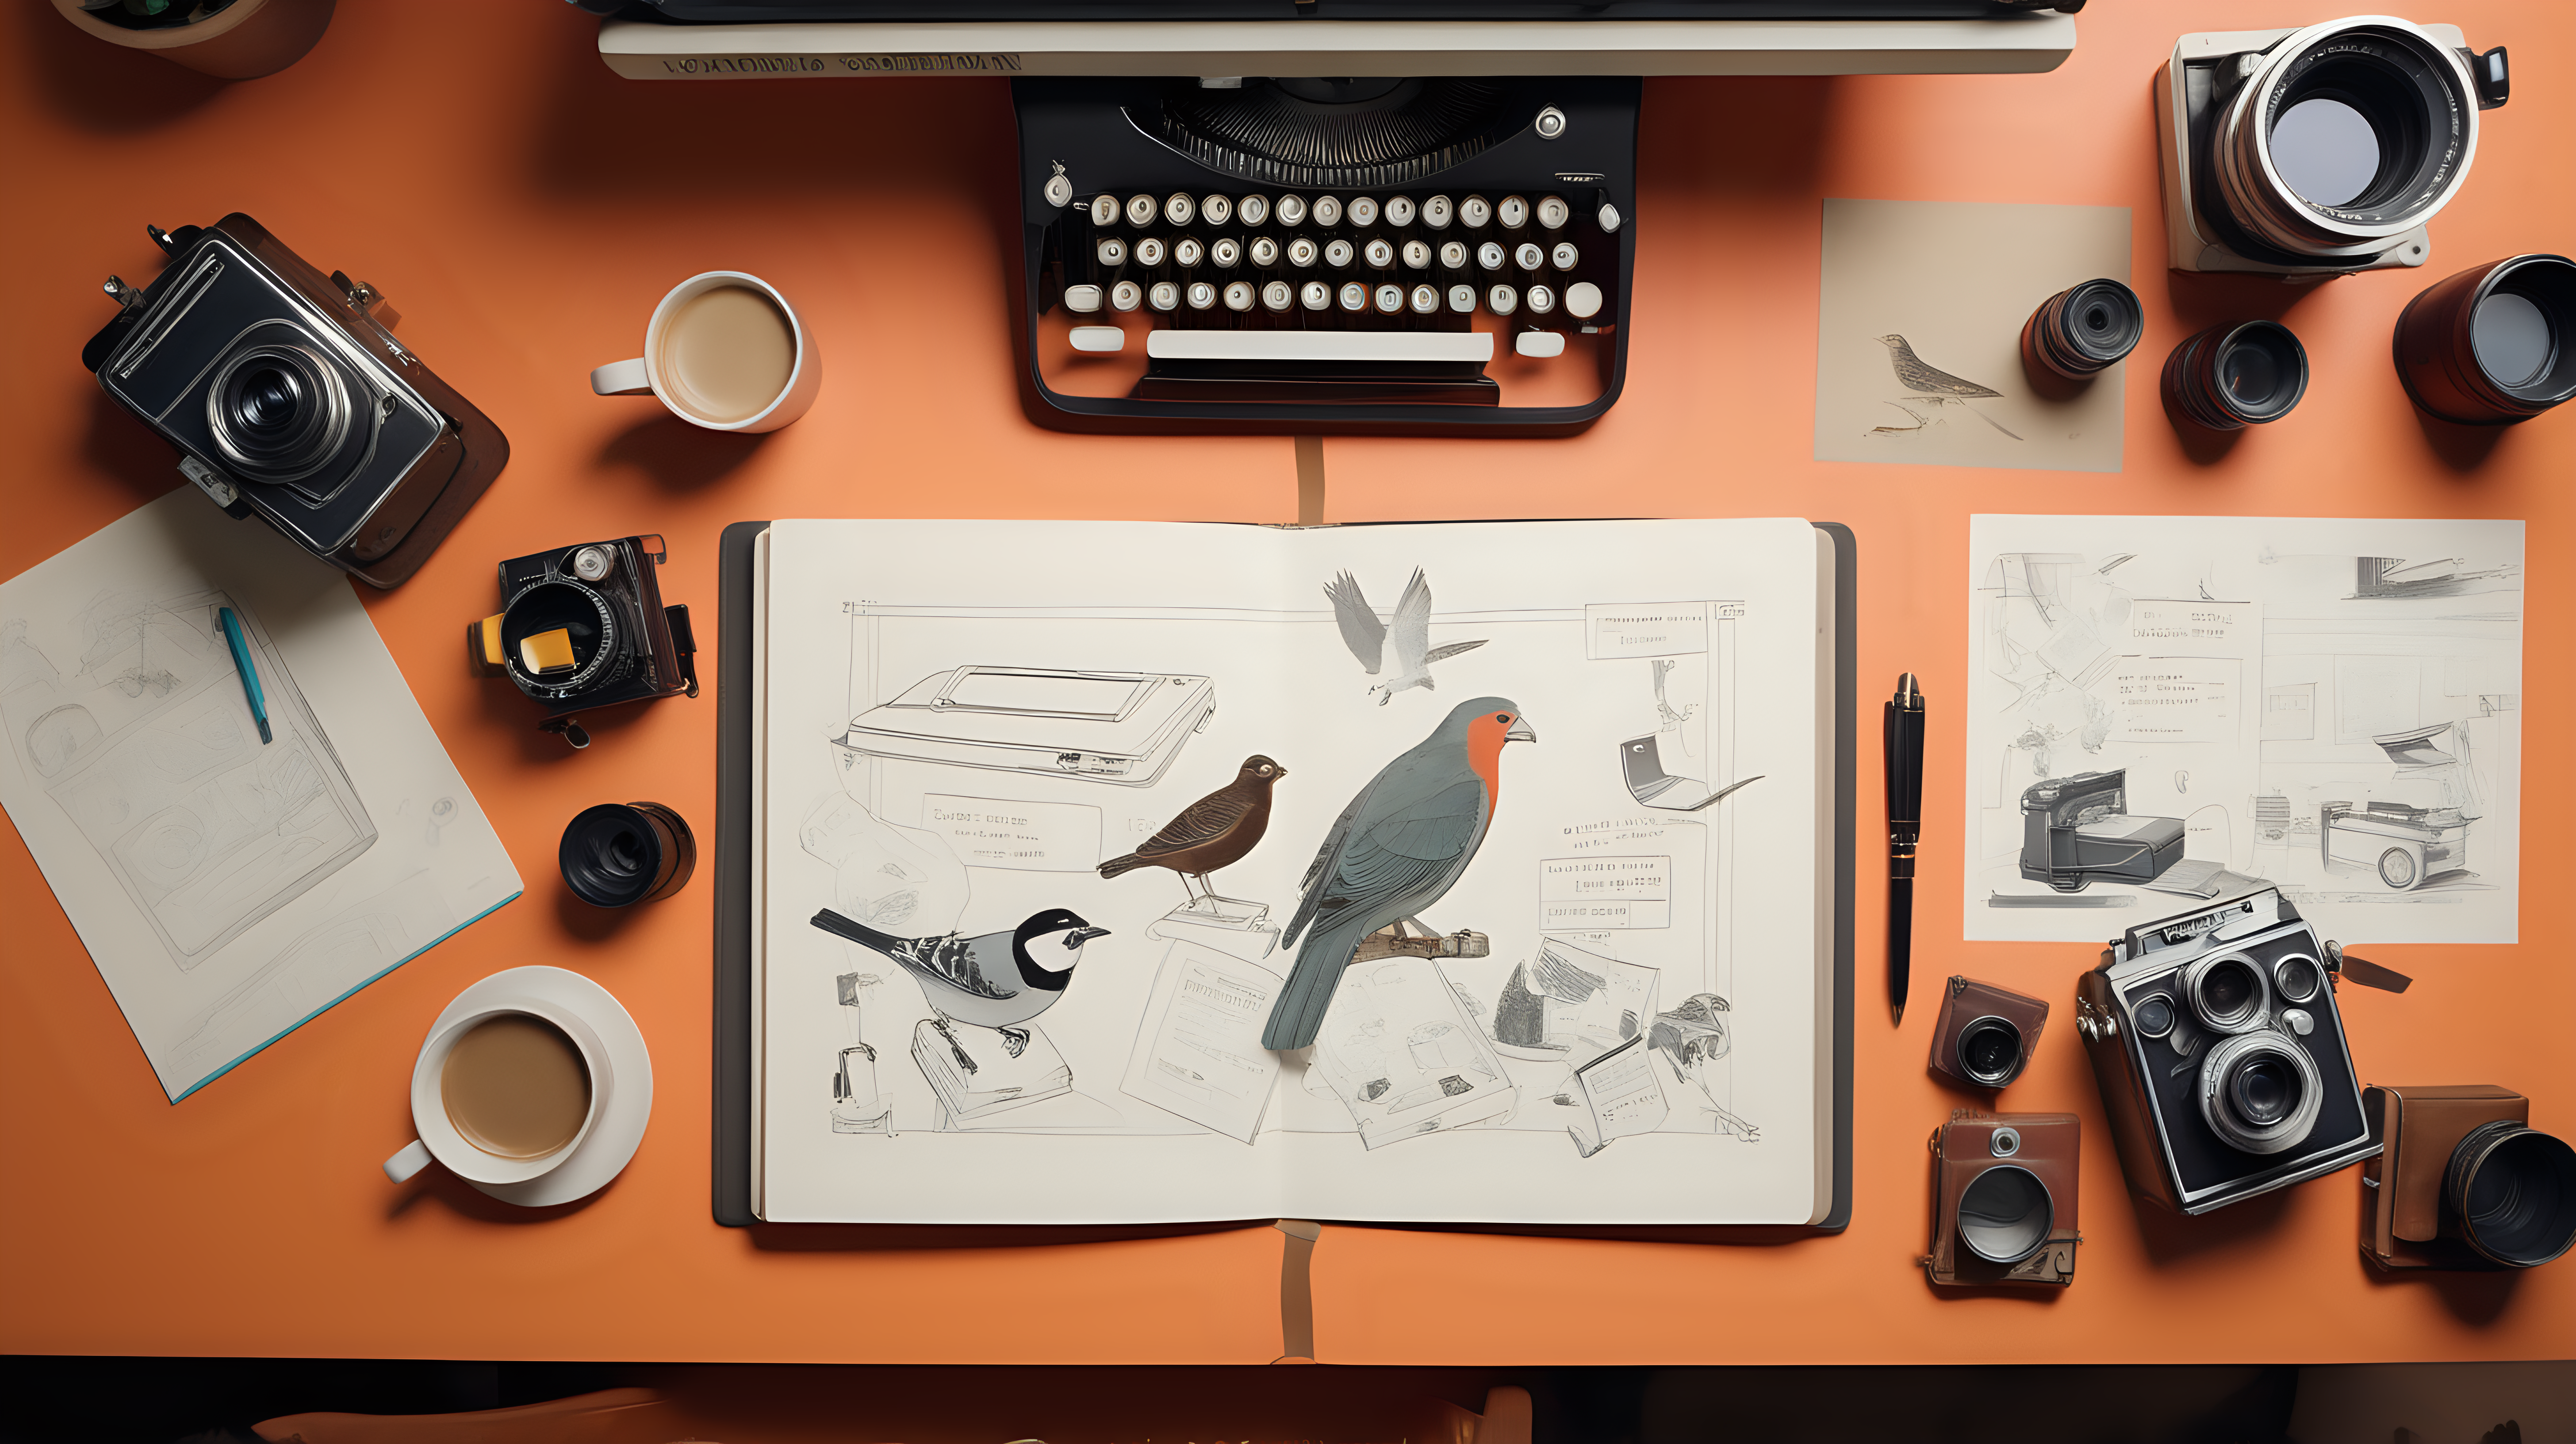 Wide shot of desktop with a large sketchpad in the center. Around the sketch pad are a coffee cup, typewriter, film camera and birdwatching manual in the style of a wes anderson film. Camera looking down on desktop from above.